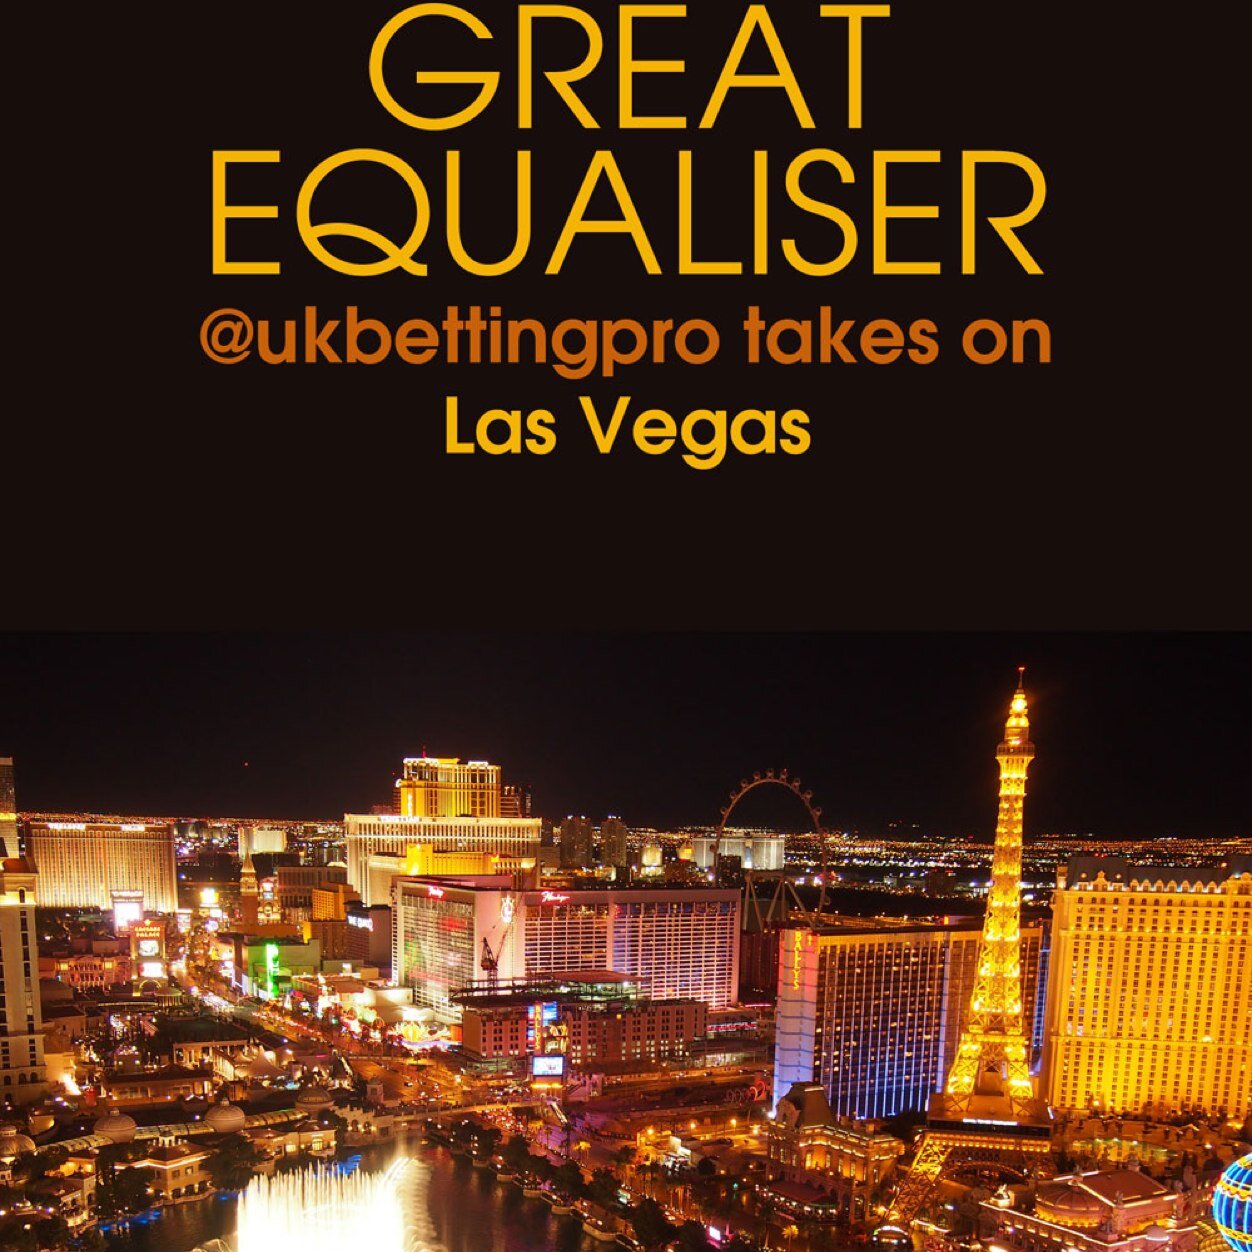 'Great Equaliser' is out now for iBook and Kindle. Follow an English dream chaser as I journey through life in America and Las Vegas during the 2013 NFL Season.